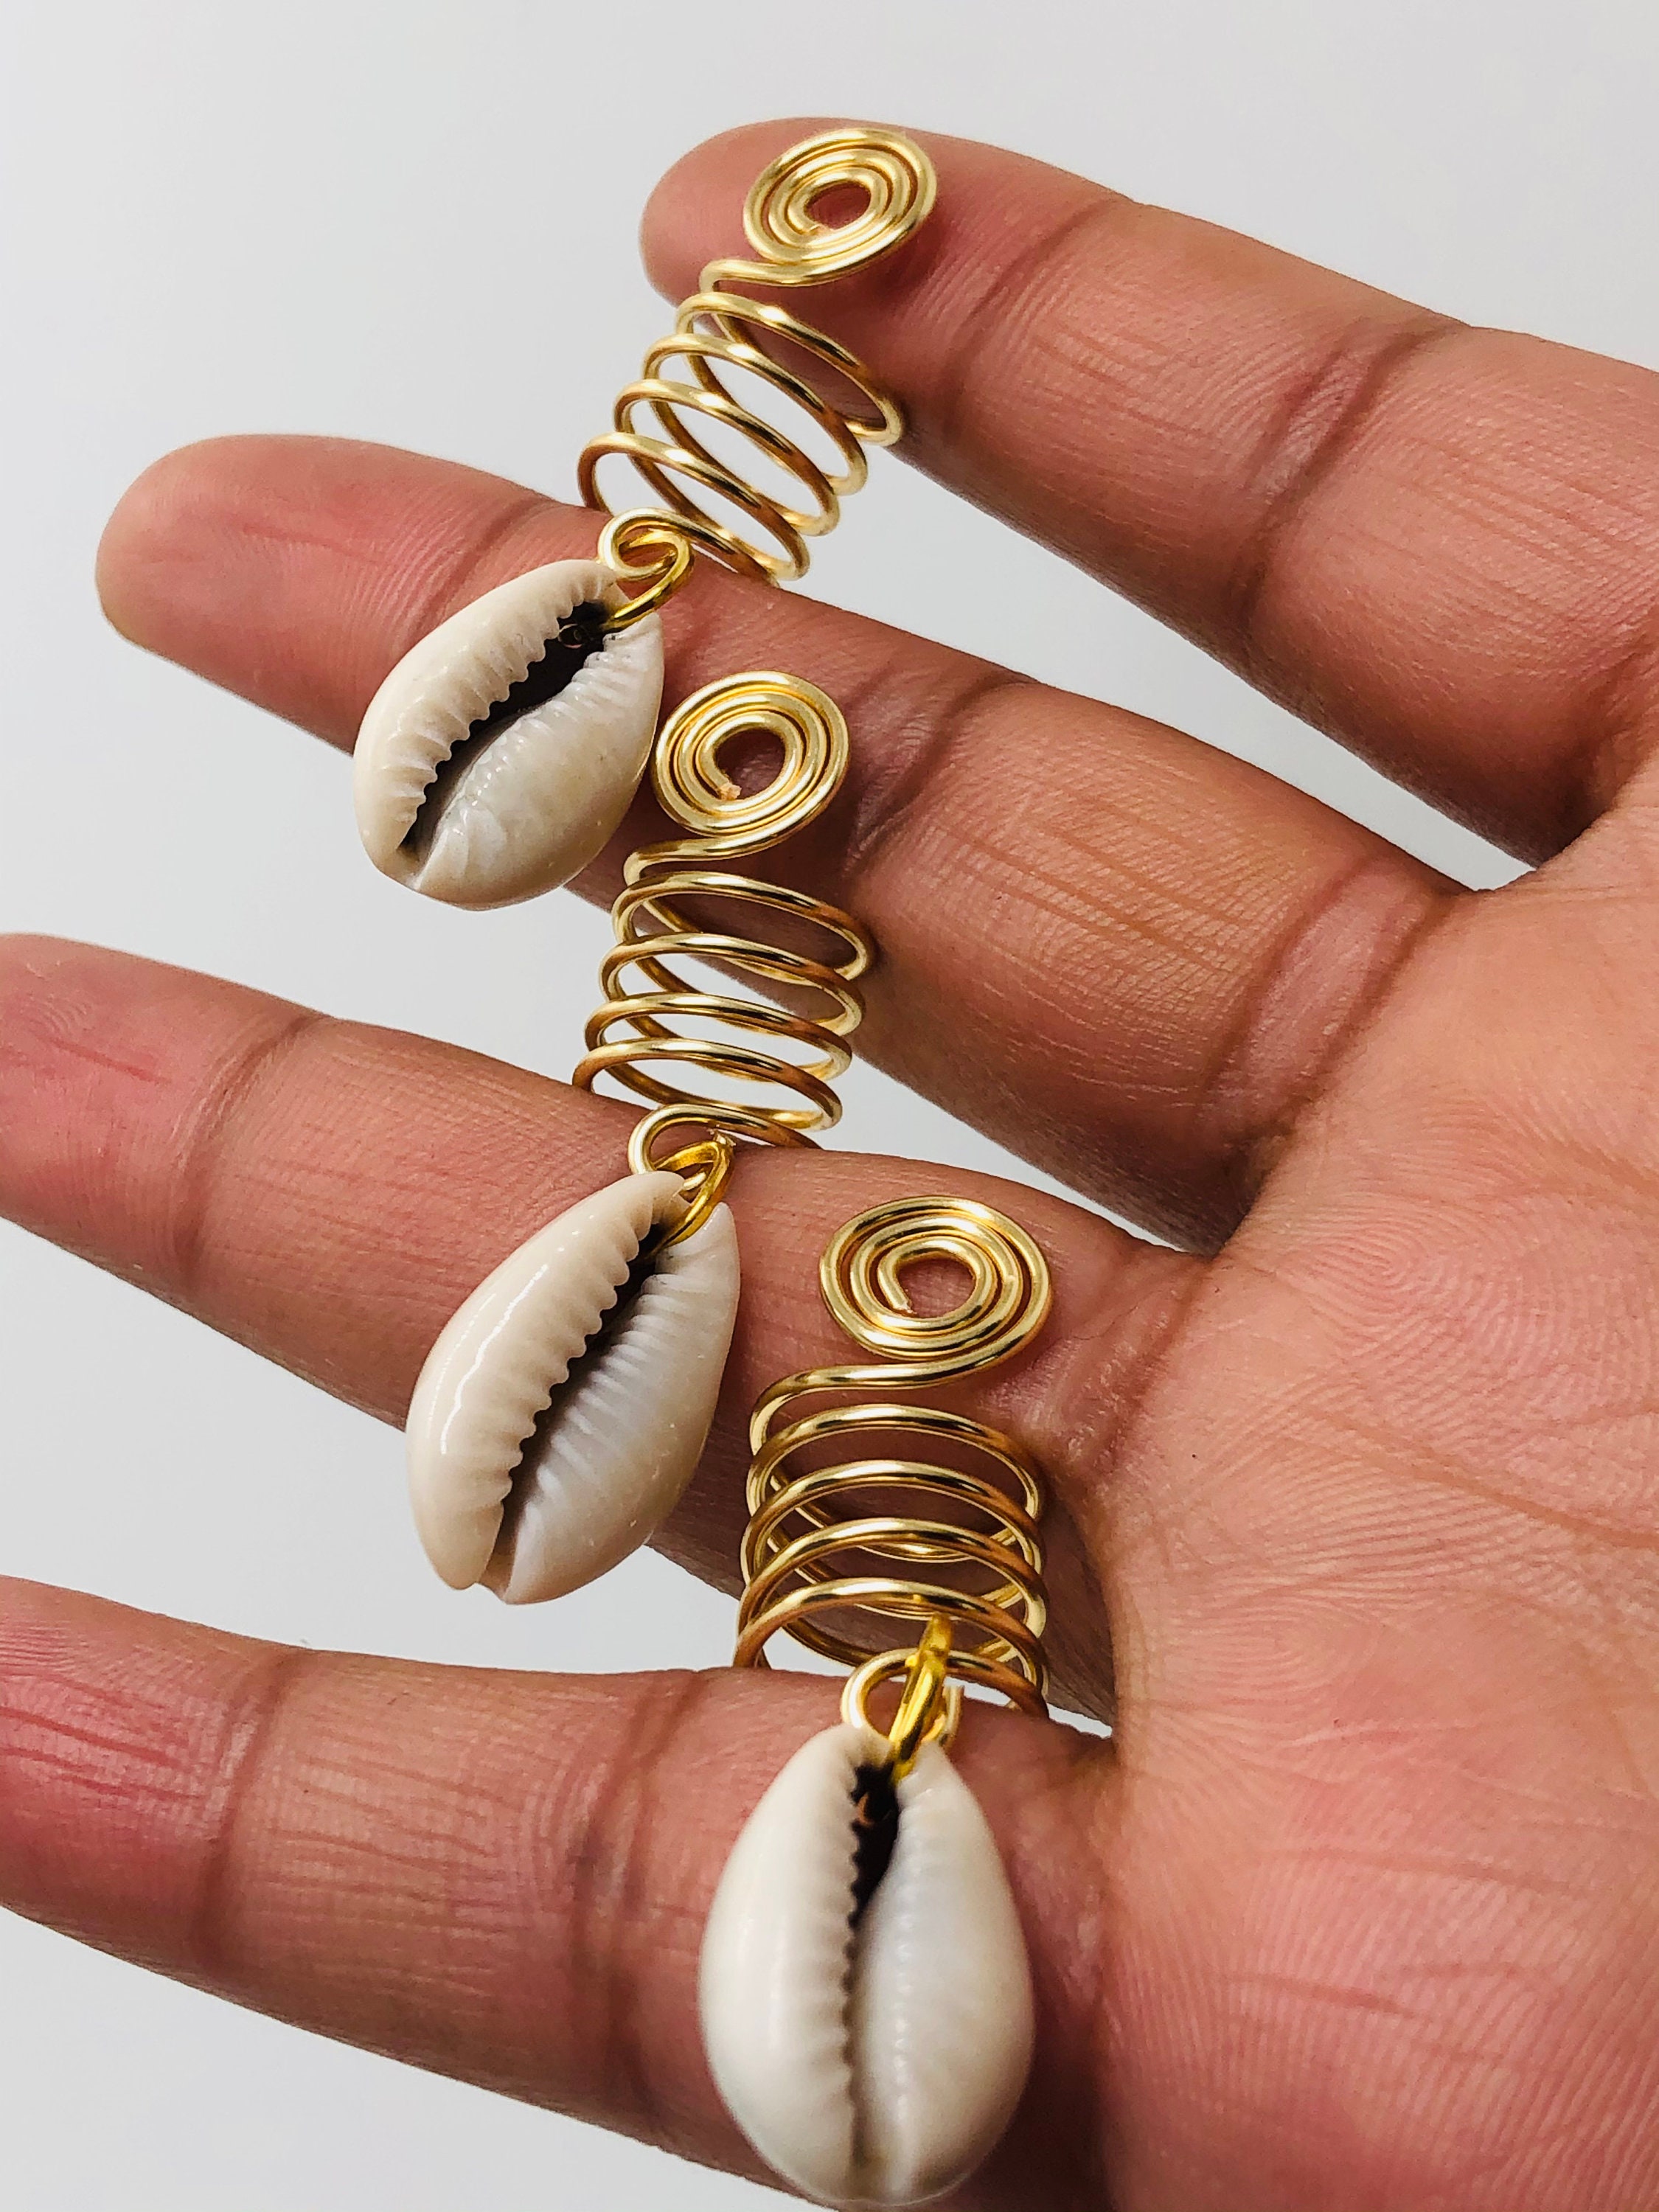 Handmade Gold Loc Jewelry Yas Queen hair Accessory for Locs